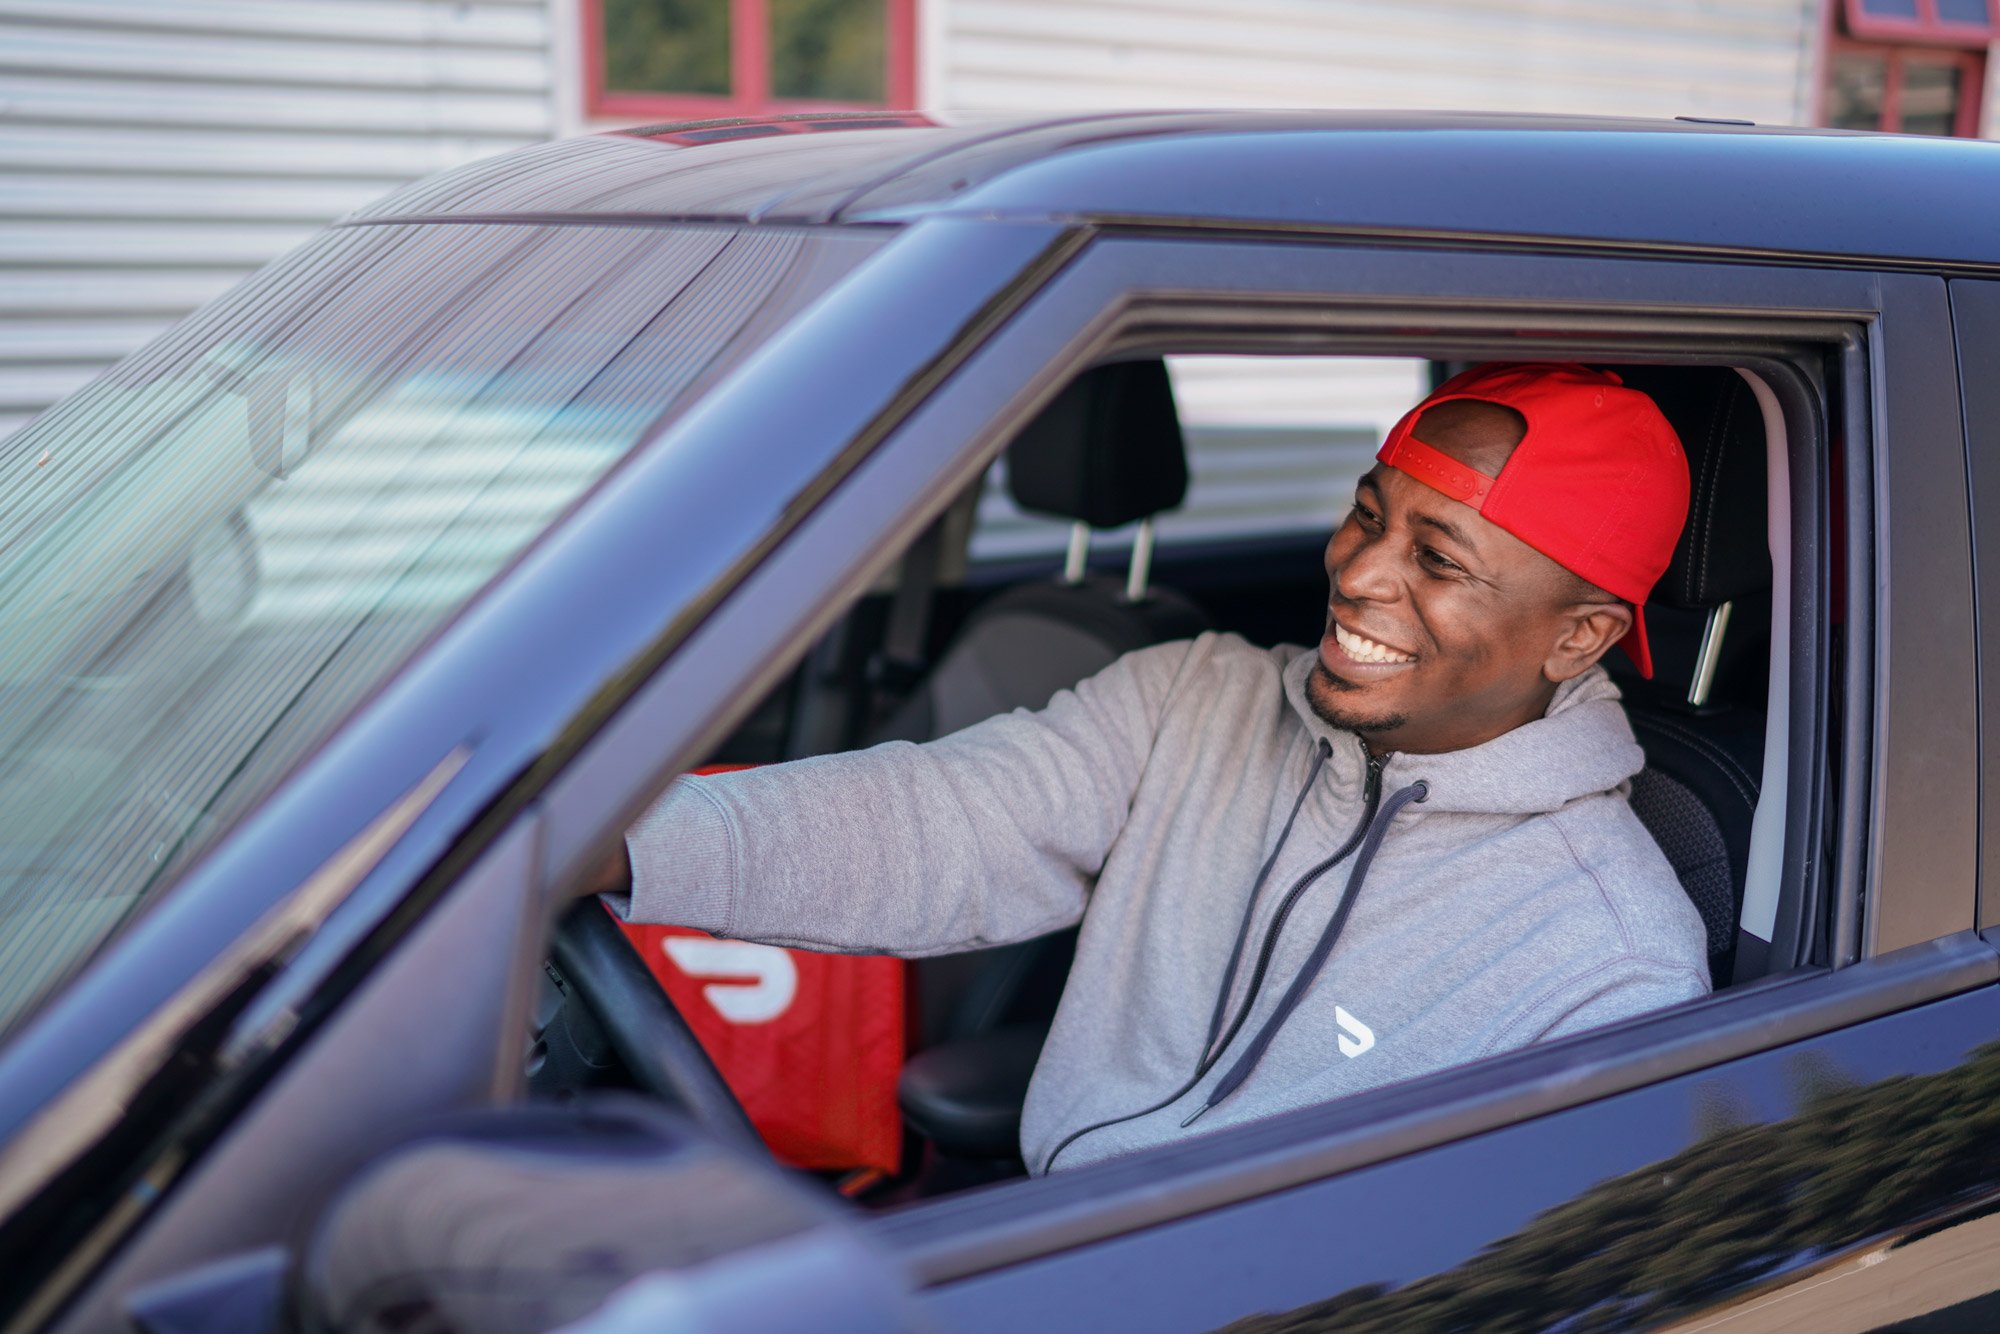 A DoorDash Driver in his car, on his way to deliver groceries to a customer.